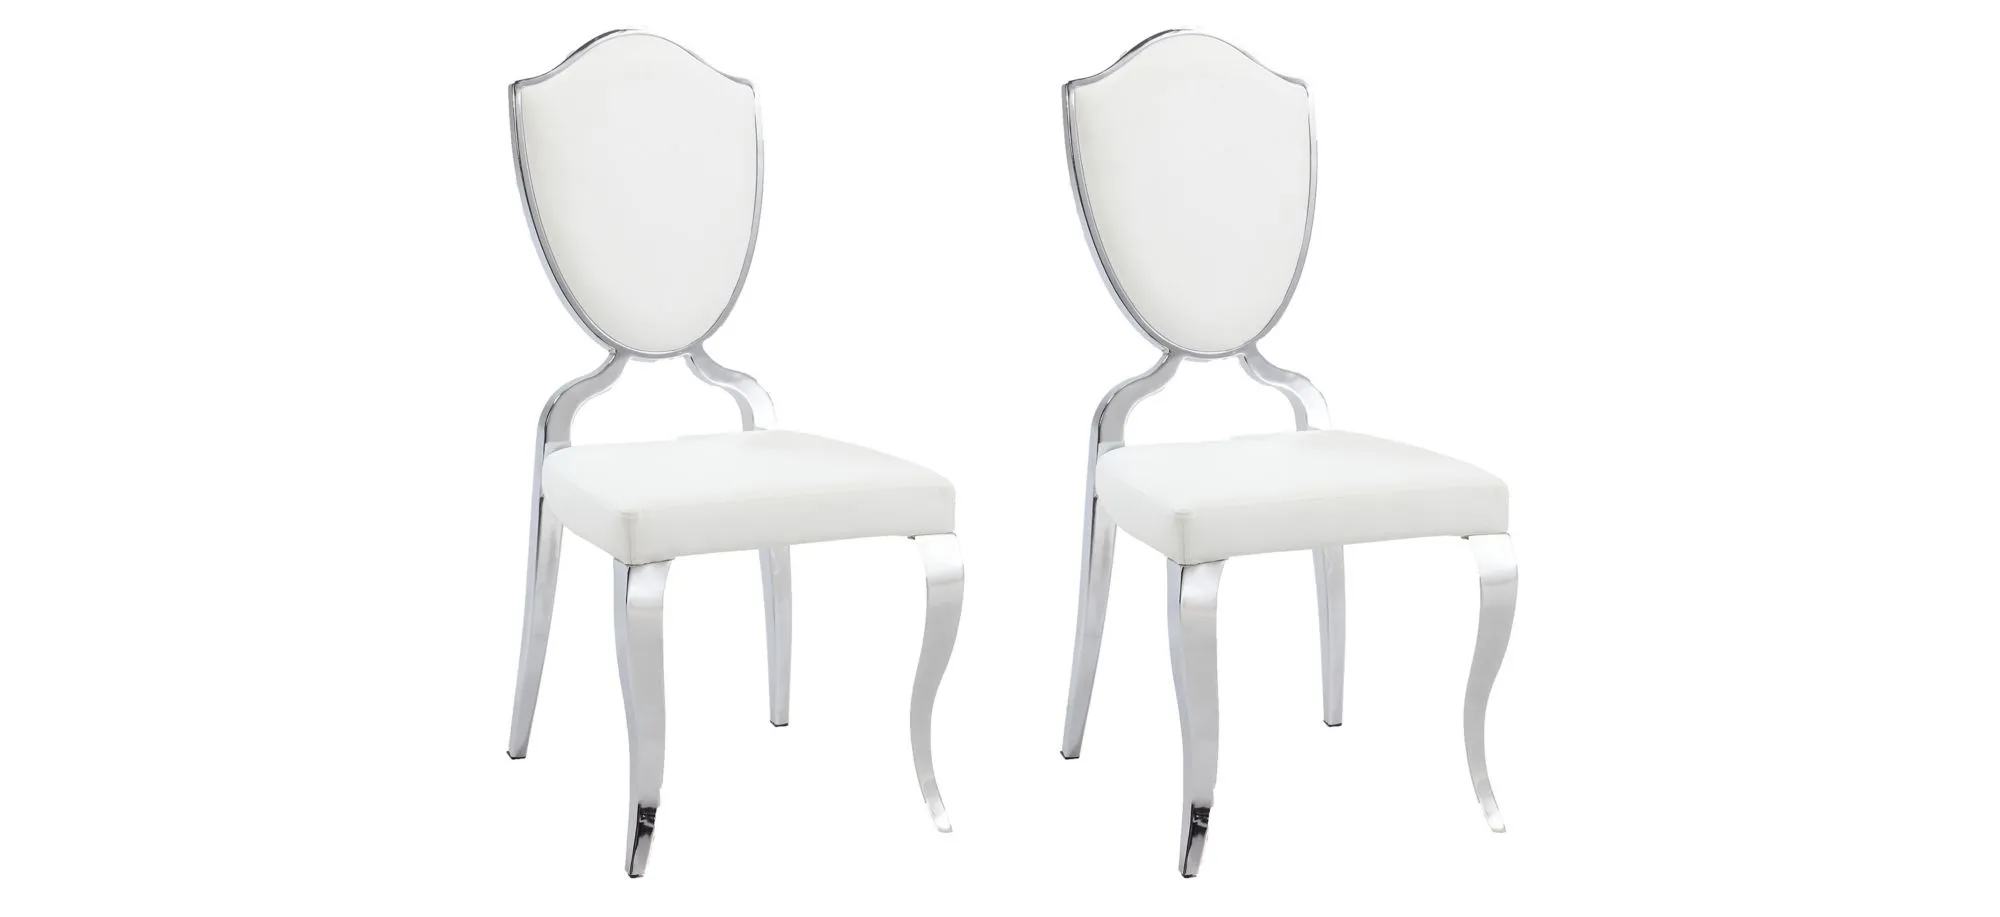 Letty Dining Chair - Set of 2 in White by Chintaly Imports